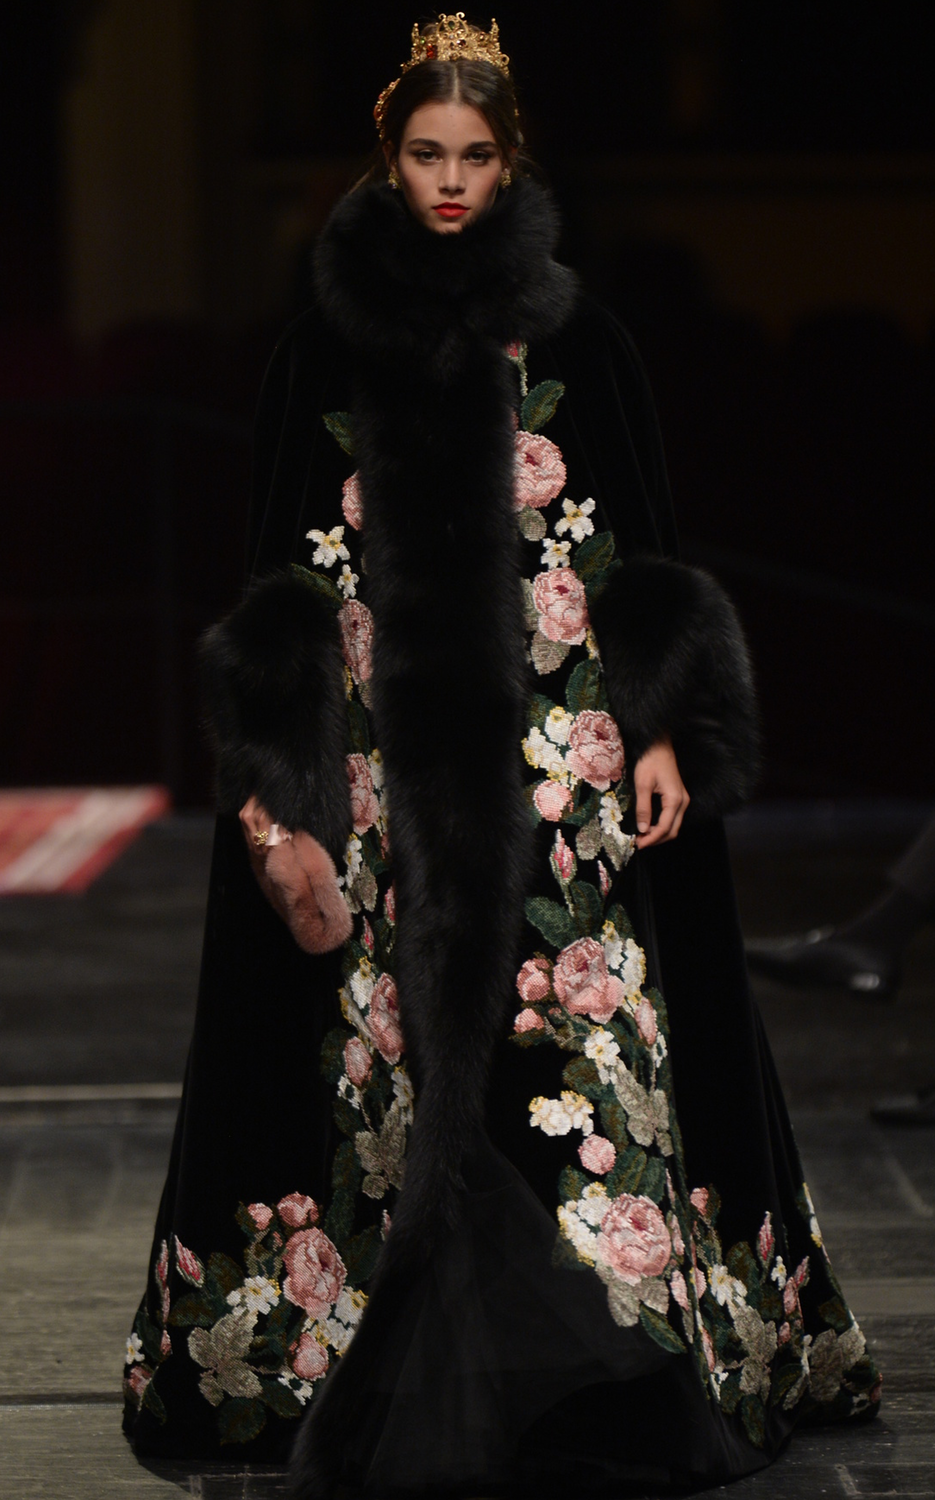 LOOKandLOVEwithLOLO: Spring 2016 Couture featuring Dolce & Gabbana